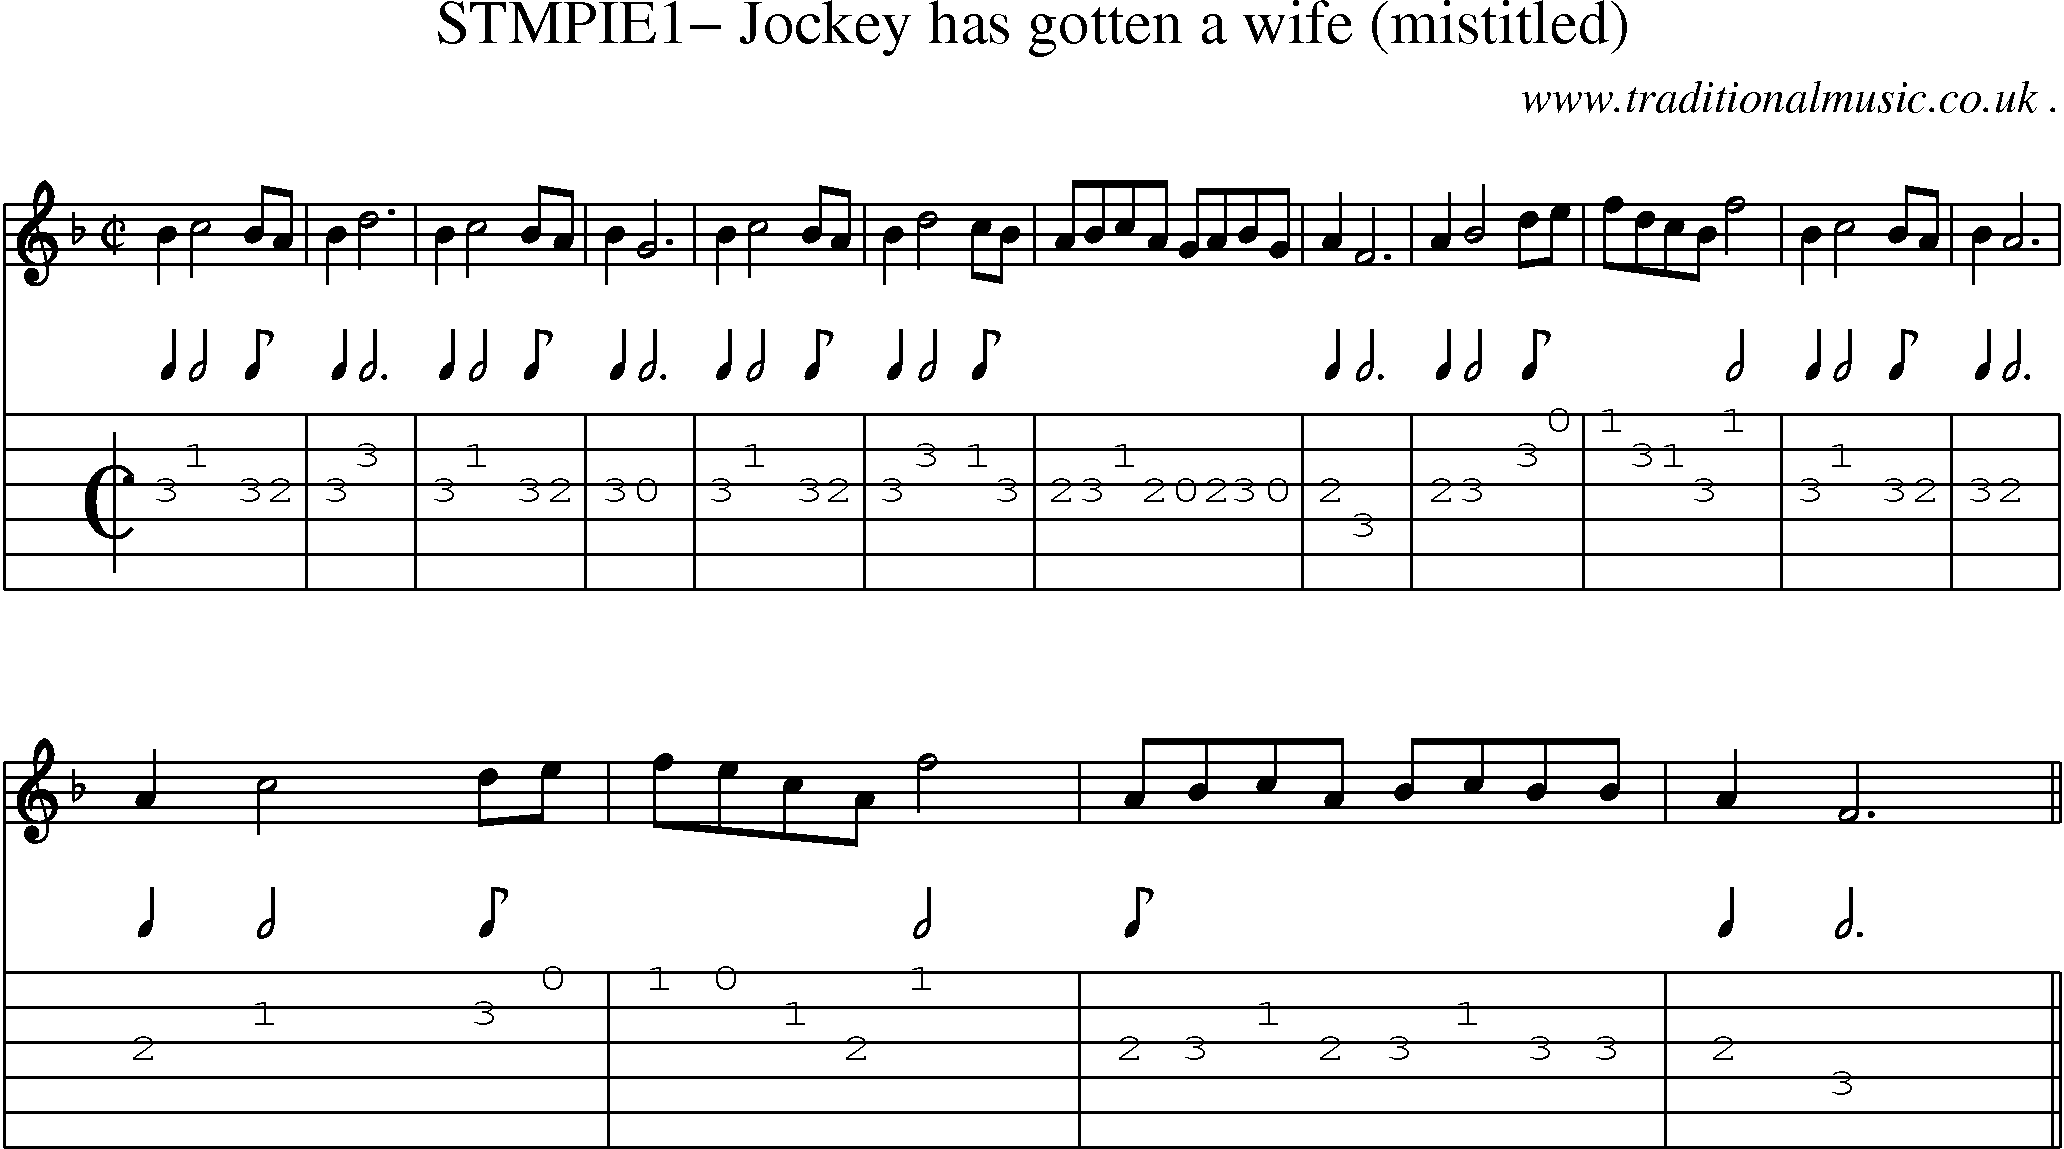 Sheet-Music and Guitar Tabs for Stmpie1 Jockey Has Gotten A Wife (mistitled)